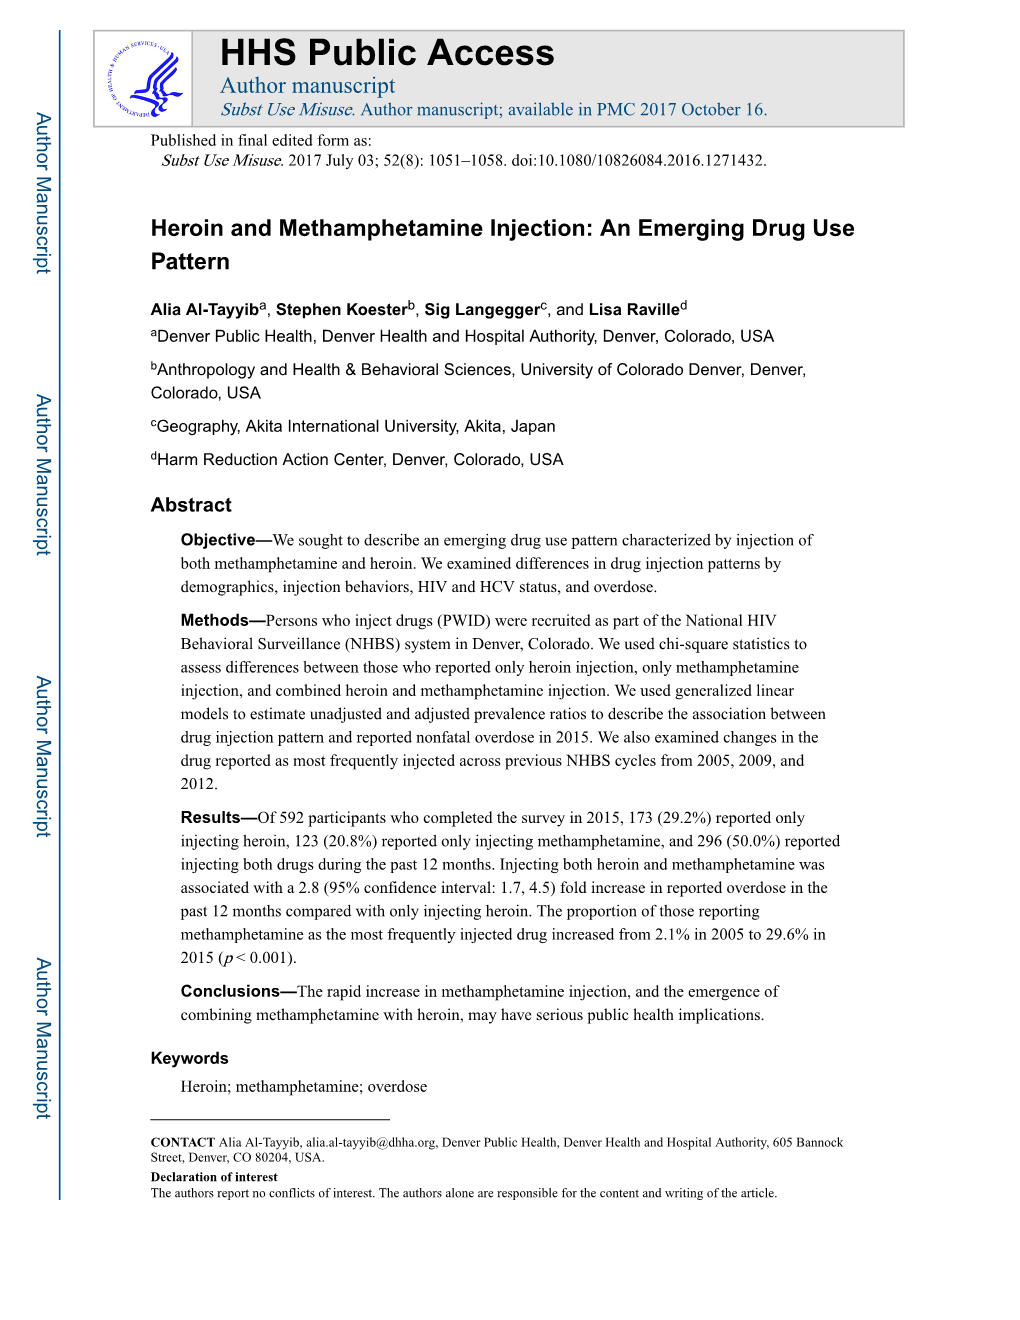 Heroin and Methamphetamine Injection: an Emerging Drug Use Pattern